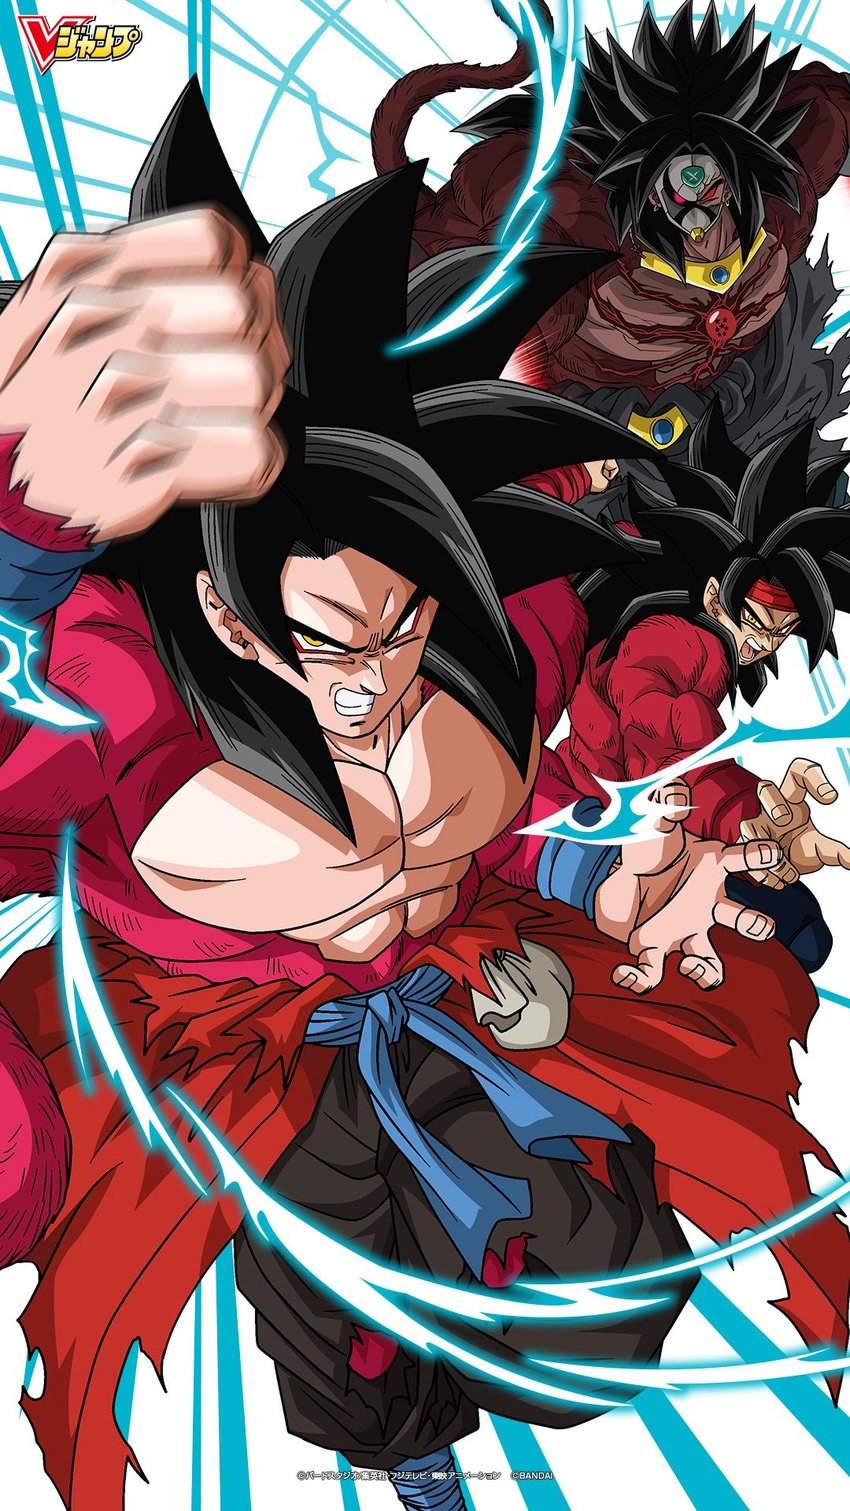 3boys bandai bardock bardock_xeno black_hair broly broly_xeno corruption dragon_ball dragon_ball_heroes energy epic father_and_son long_hair looking_at_viewer male_focus mask multiple_boys muscle official_art punch serious signature son_gokuu son_gokuu_xeno super_saiyan super_saiyan_4 yellow_eyes